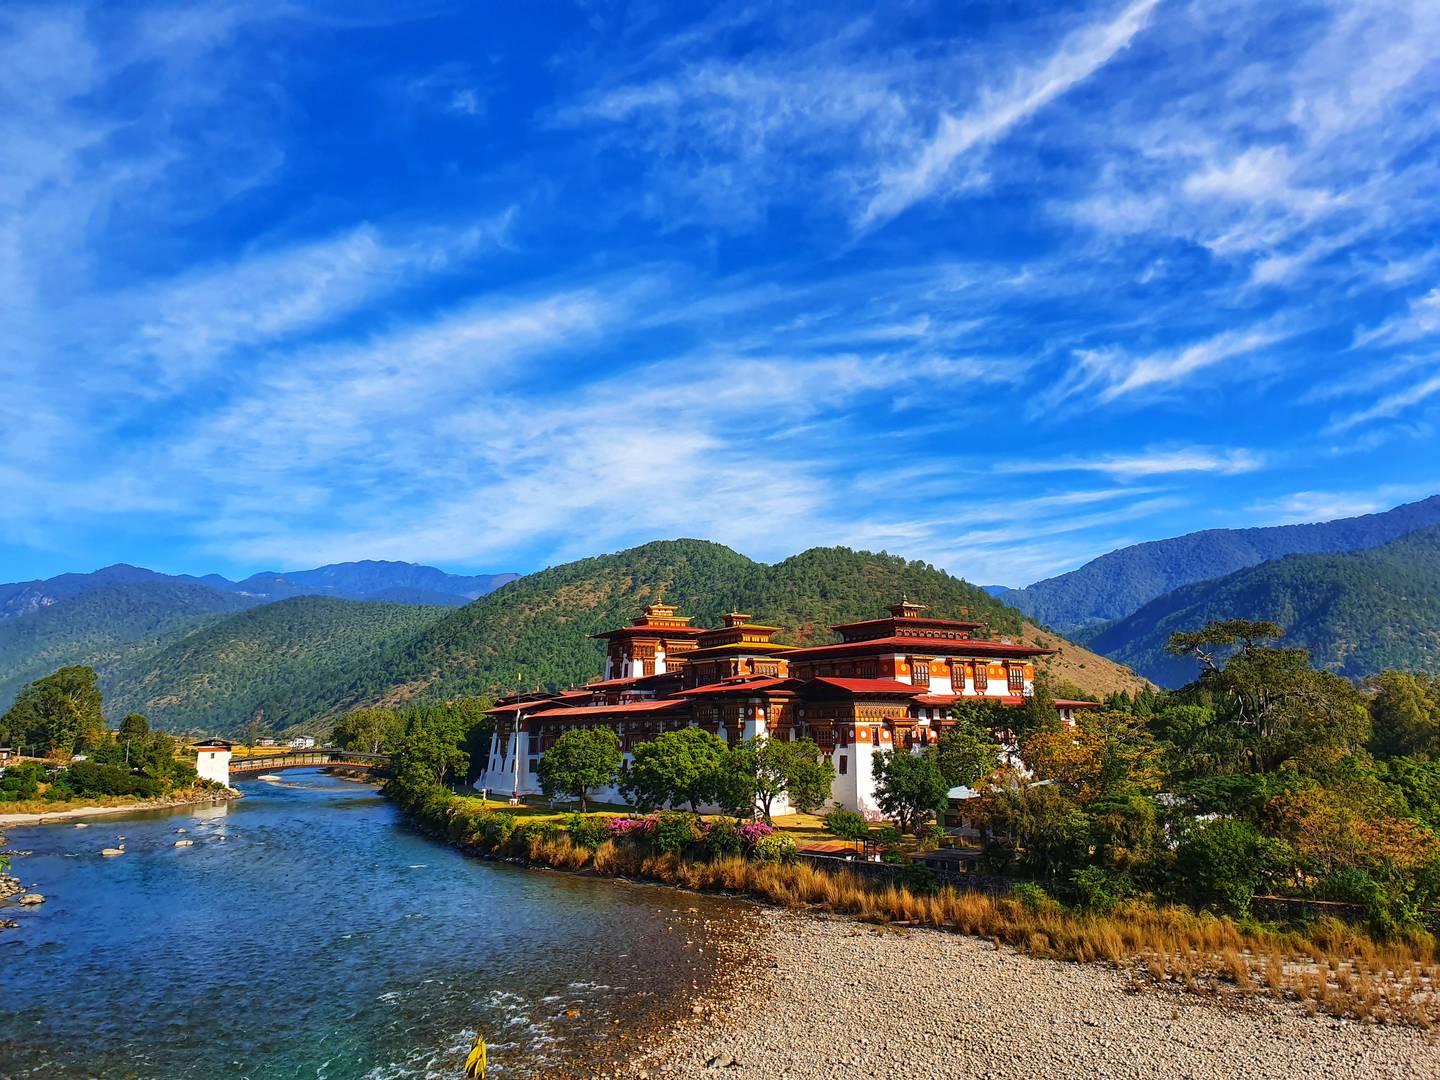 The Trans-Bhutan Trail has reopened to tourists, with all proceeds going back to the trail's upkeep and to support local communities. Photo: transbhutantrail.org.